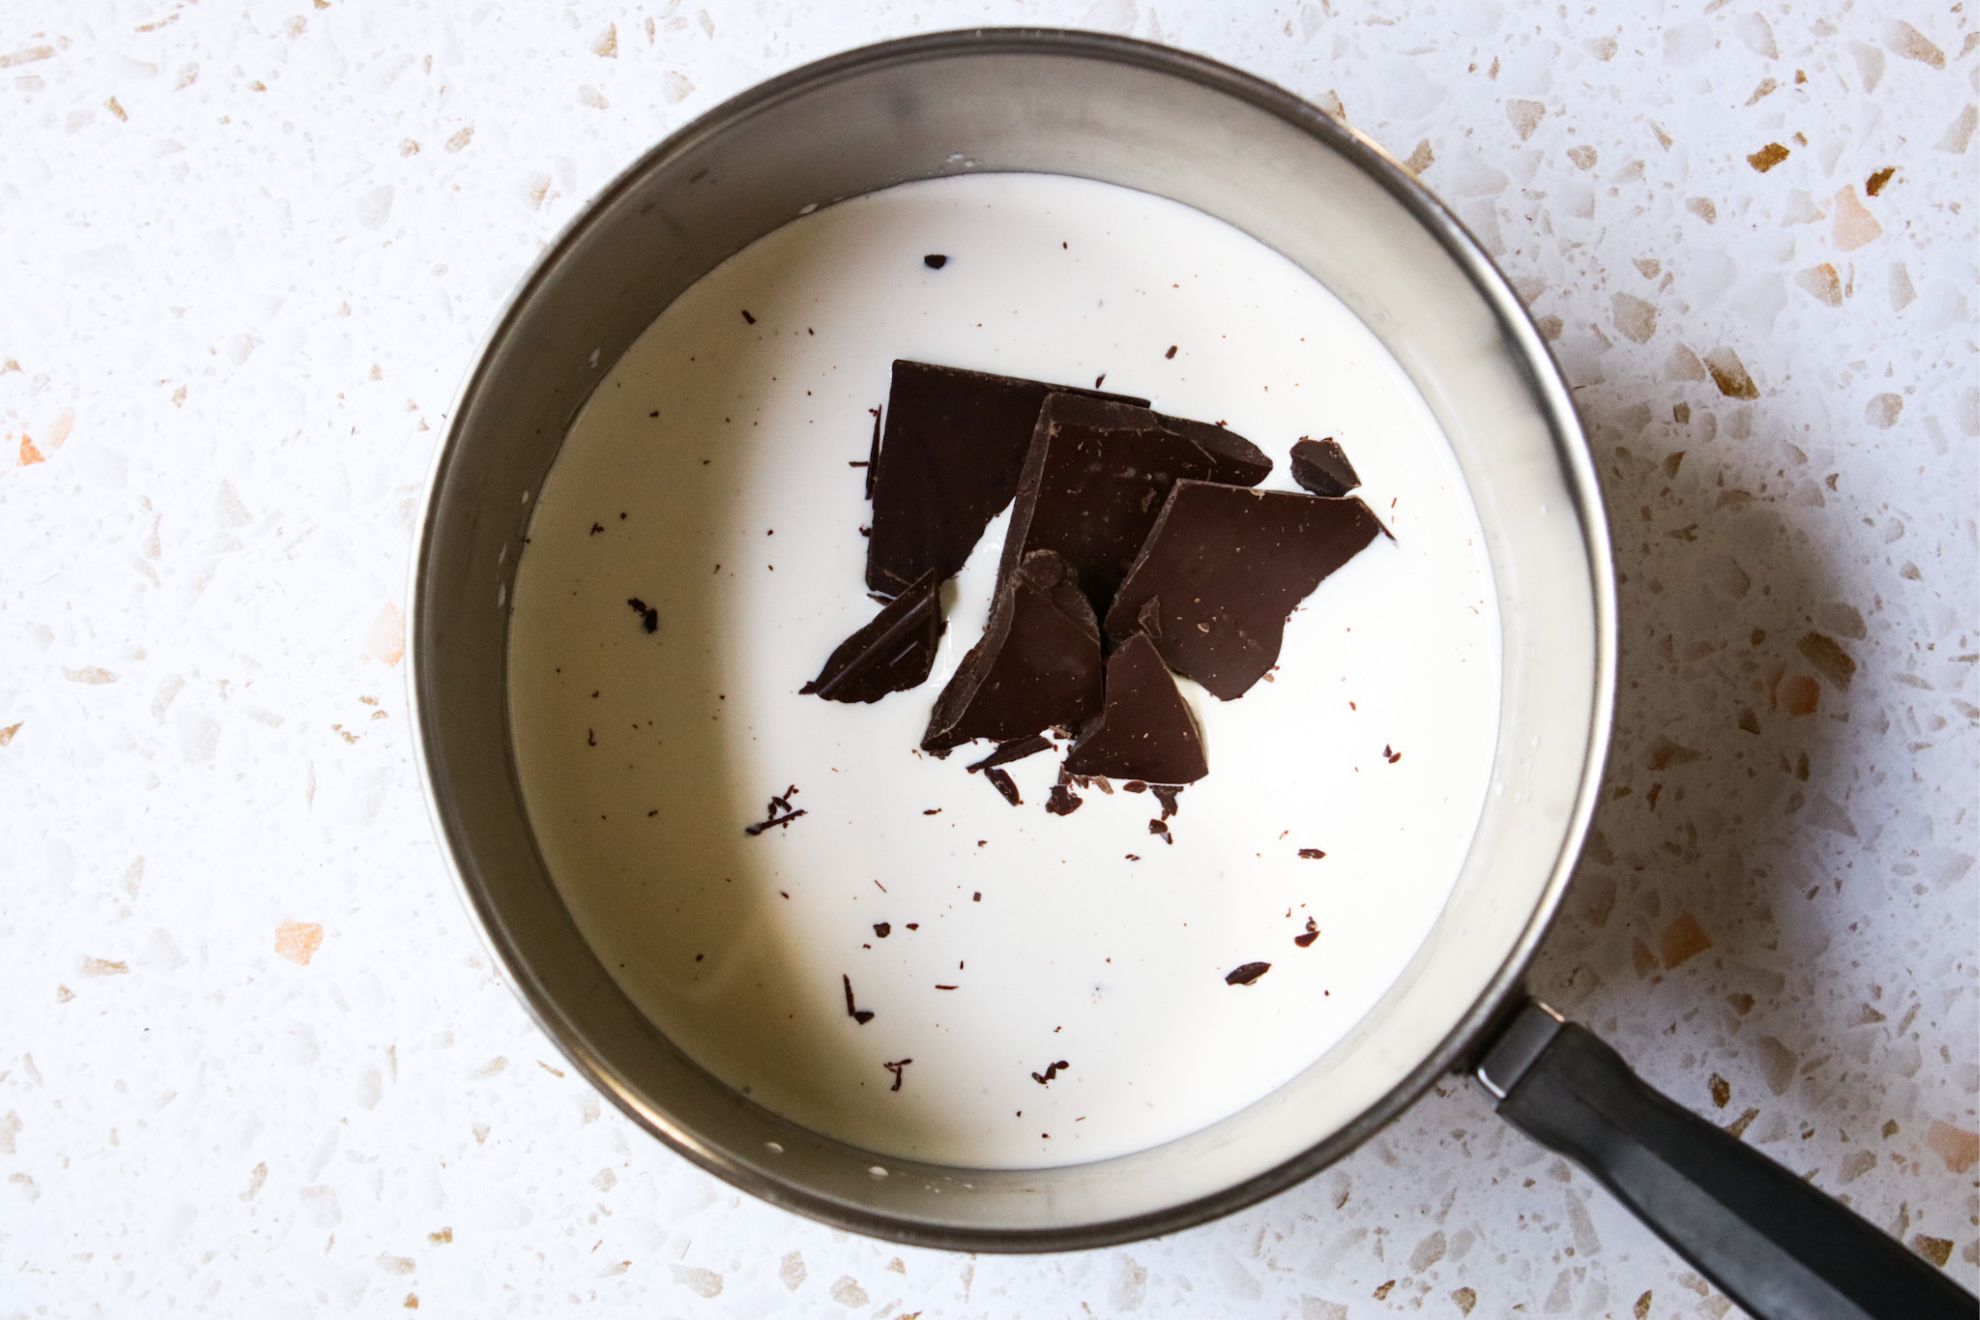 This is an overhead horizontal image of a stainless steel saucepan with milk and chocolate bar pieces in it. The pan sits on a white and tan terrazzo surface.